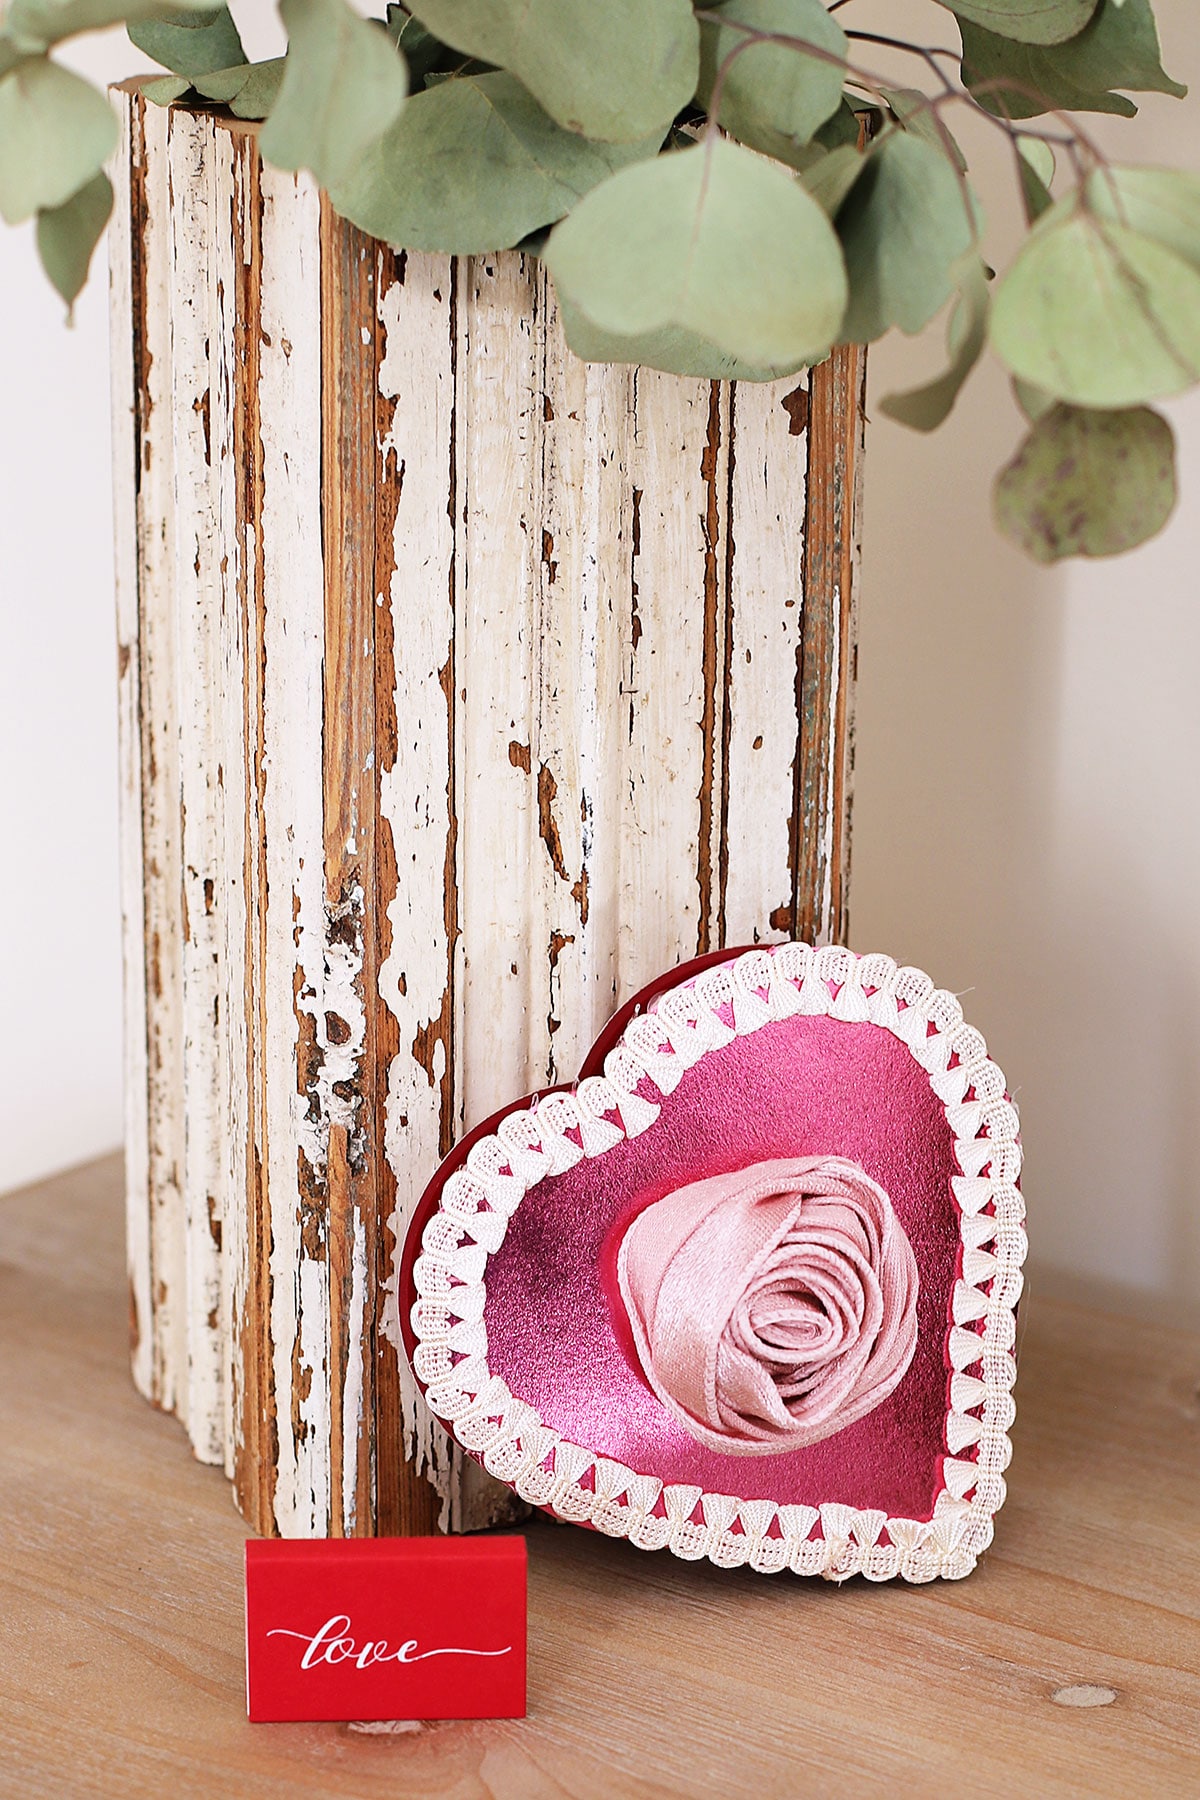 Vintage inspired candy box with pink rose made from a ribbon.